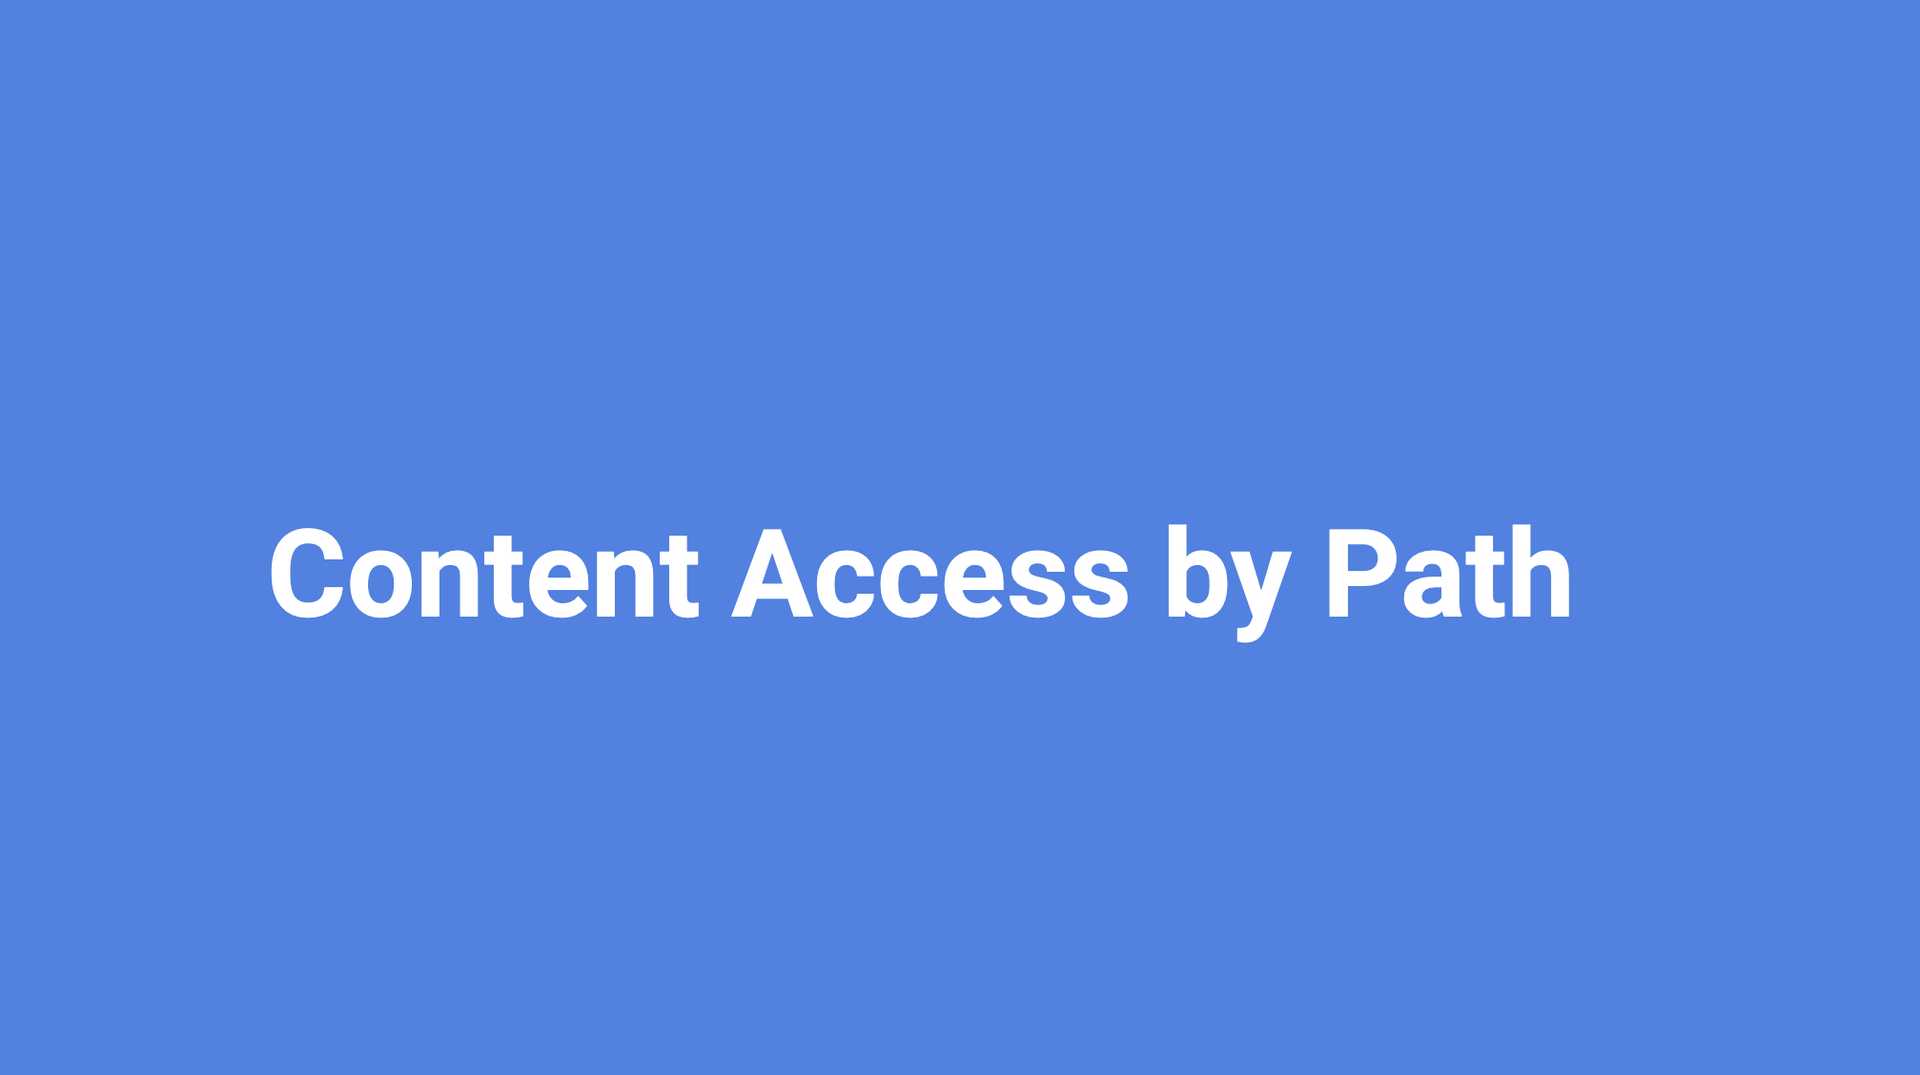 Content Access by Path